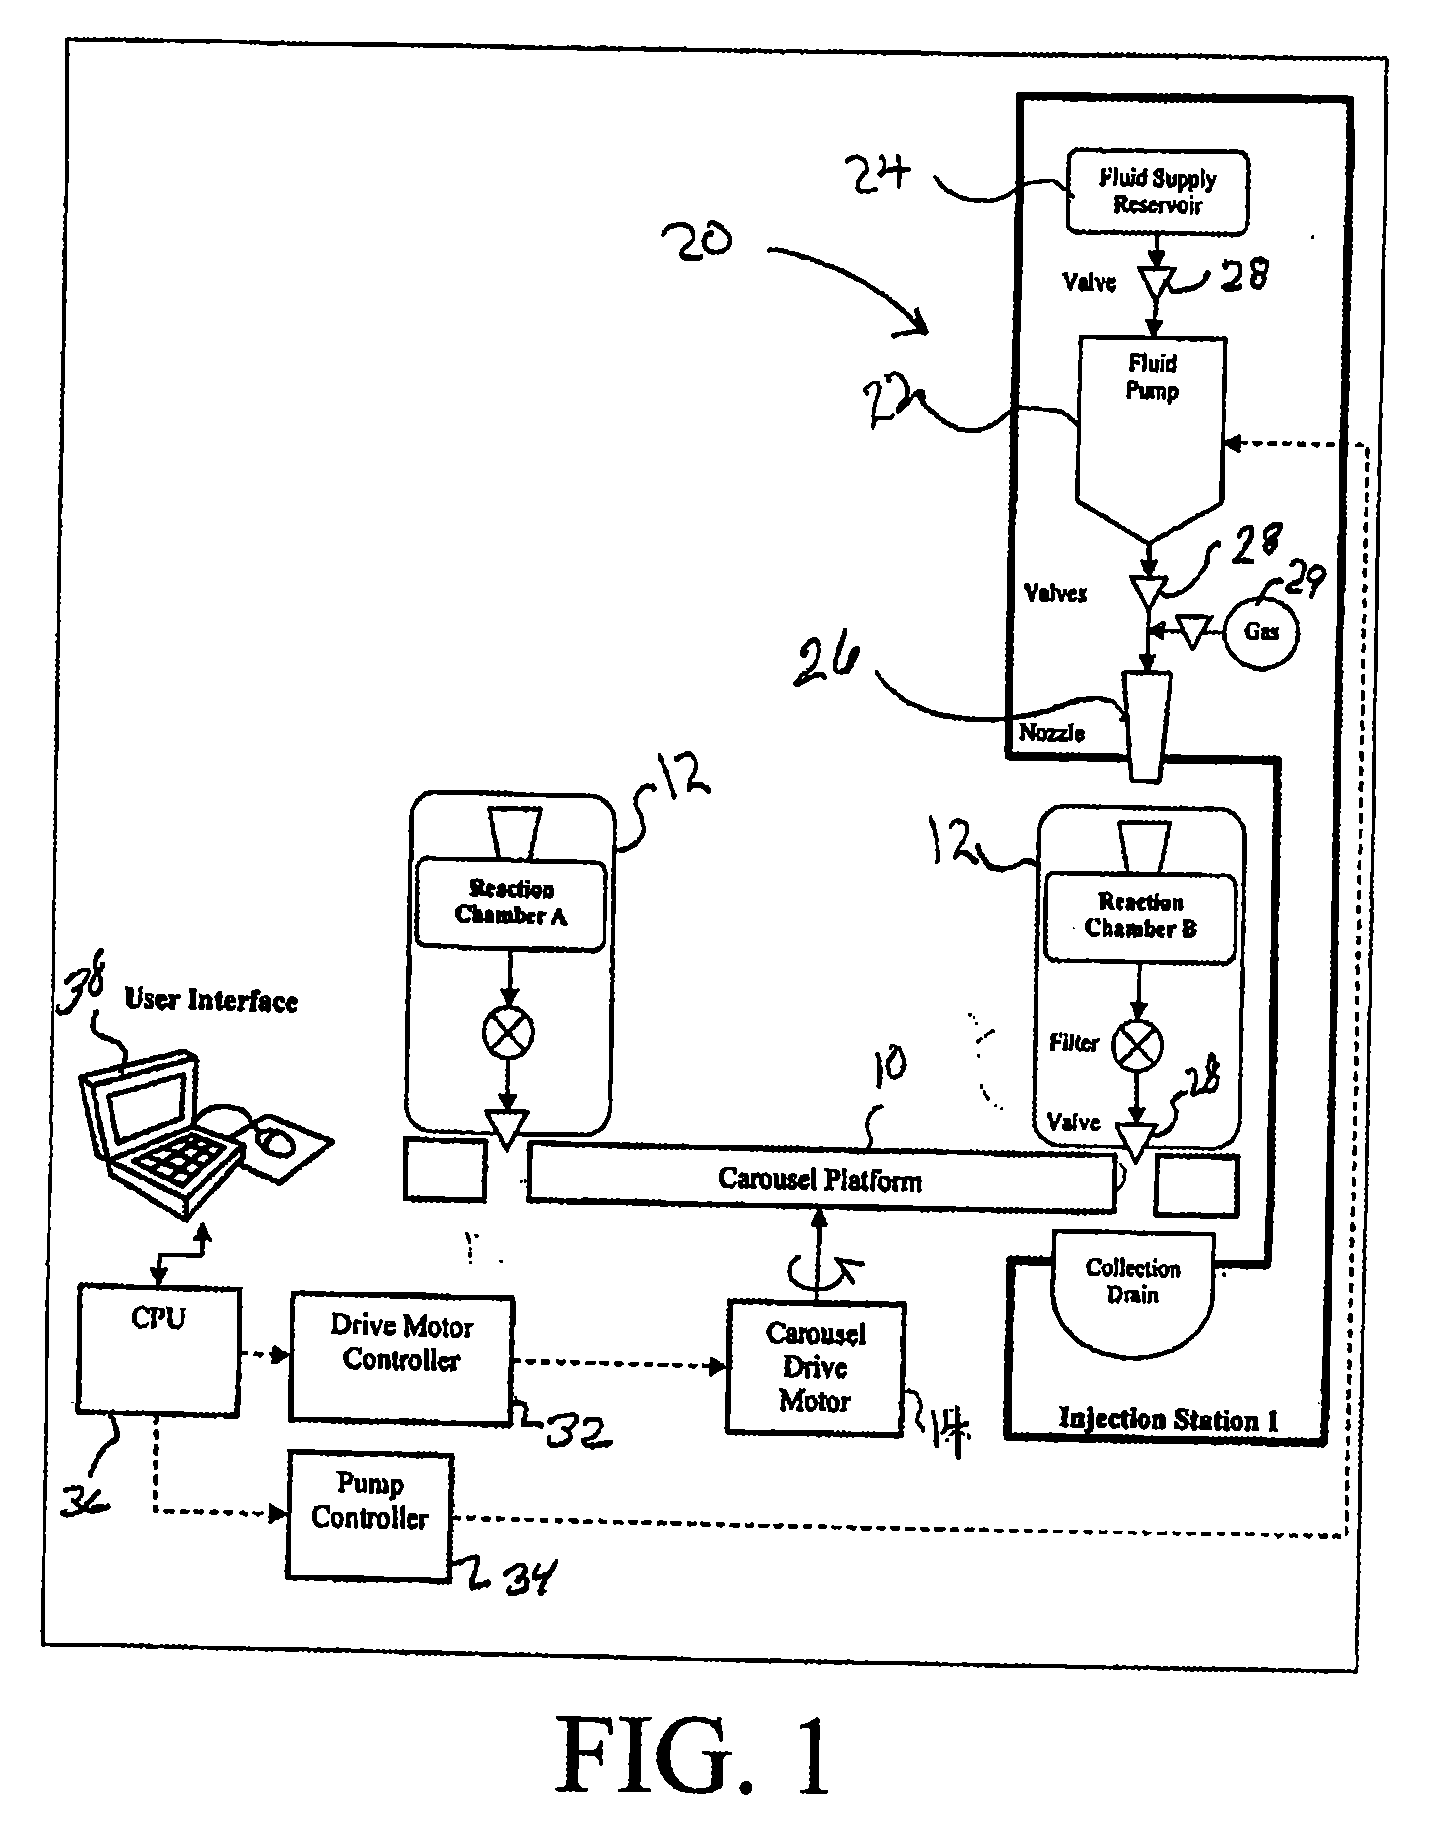 Automated chemical synthesizer and method for synthesis using same